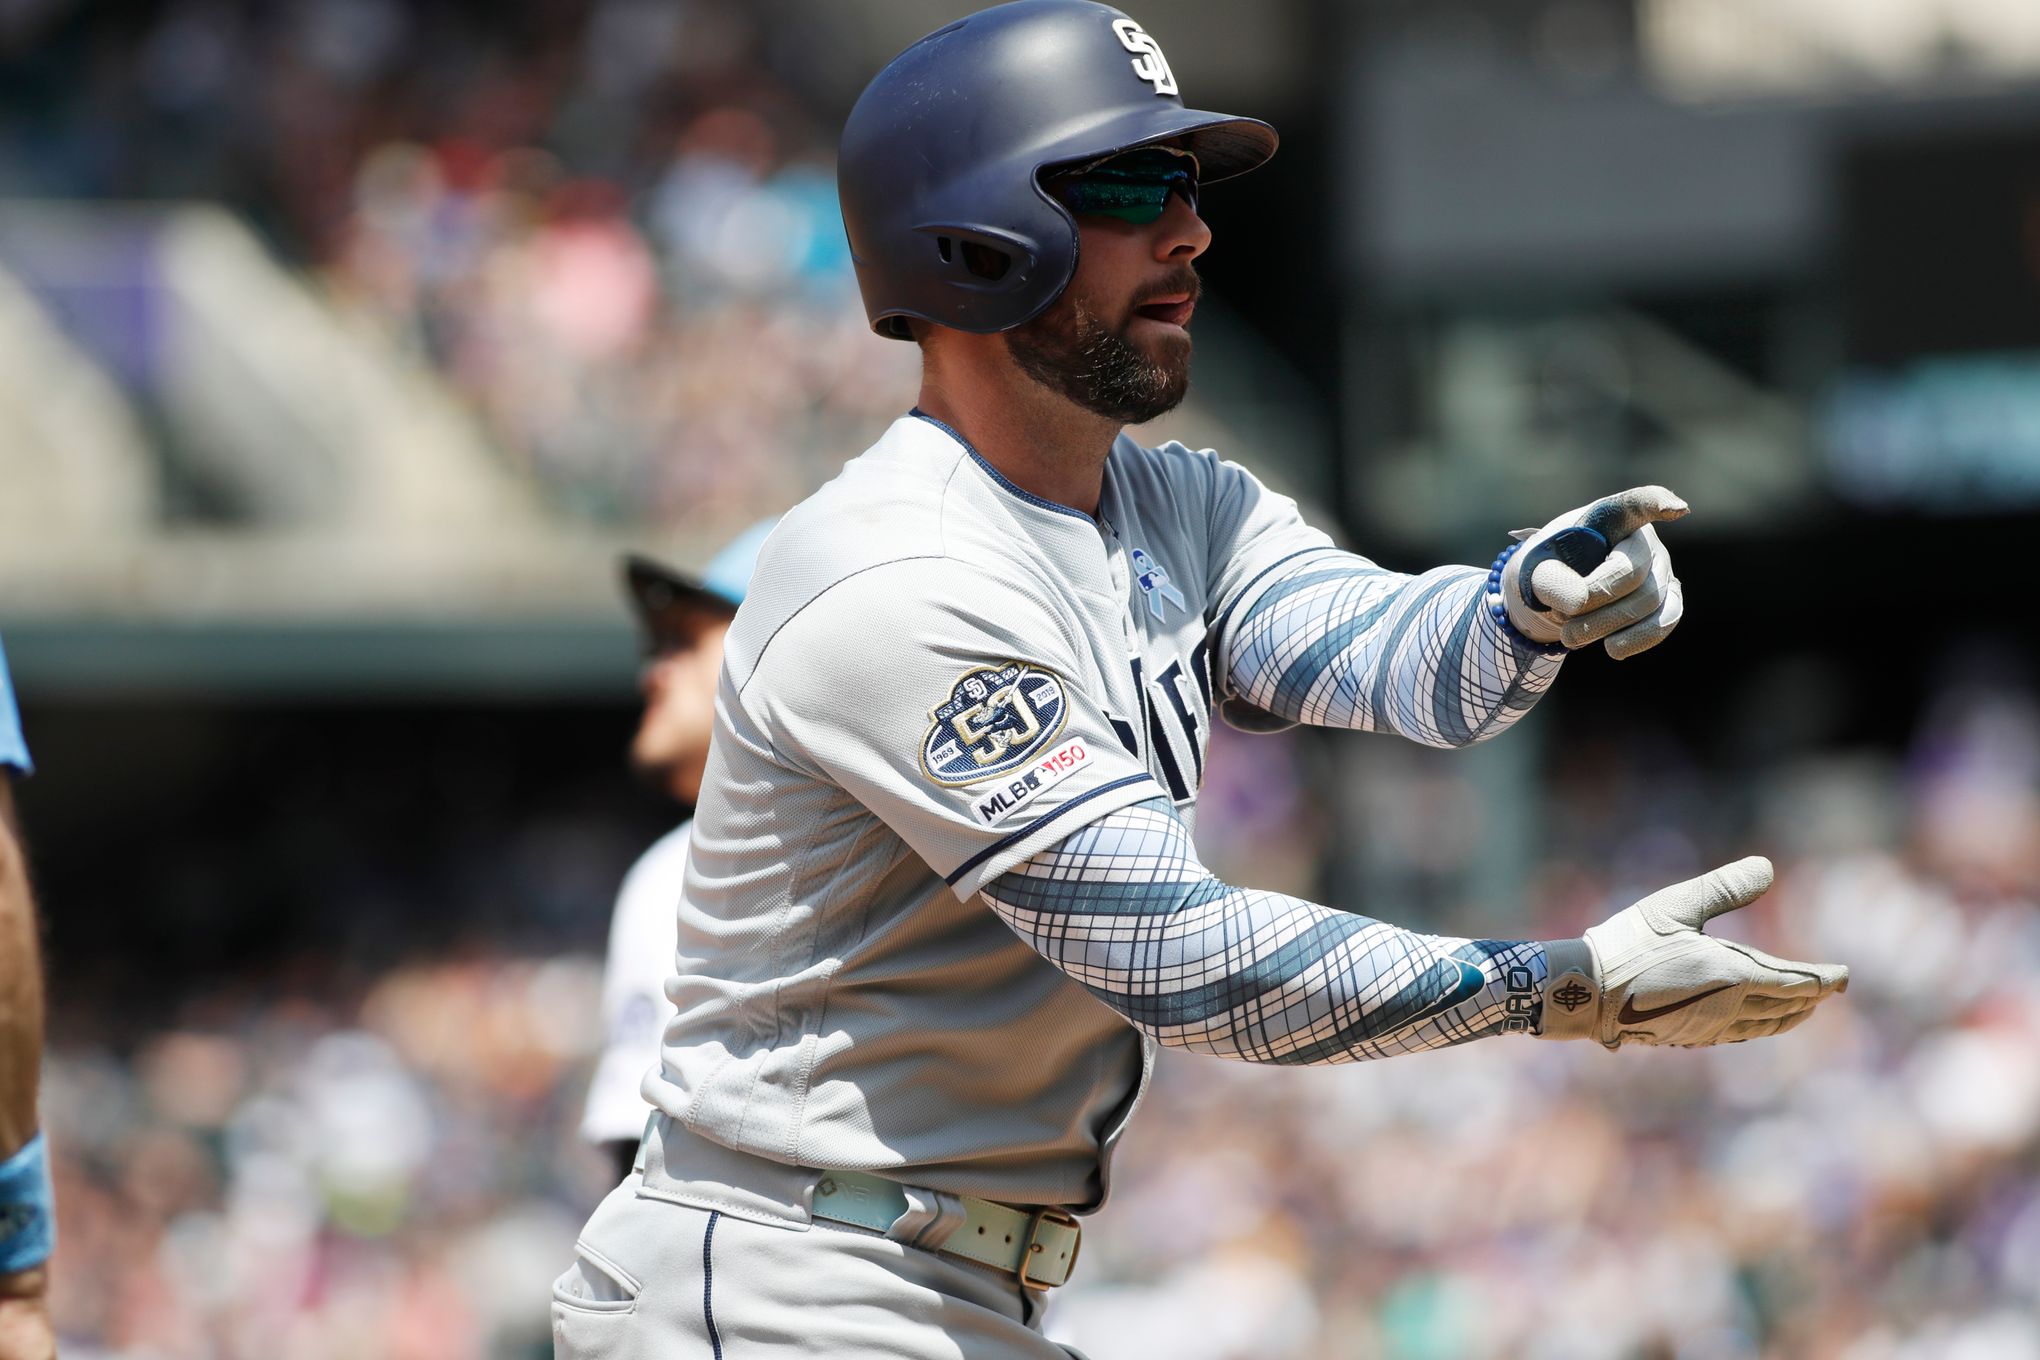 Ian Desmond launches two-out, two-run home run as Rockies walk off Padres